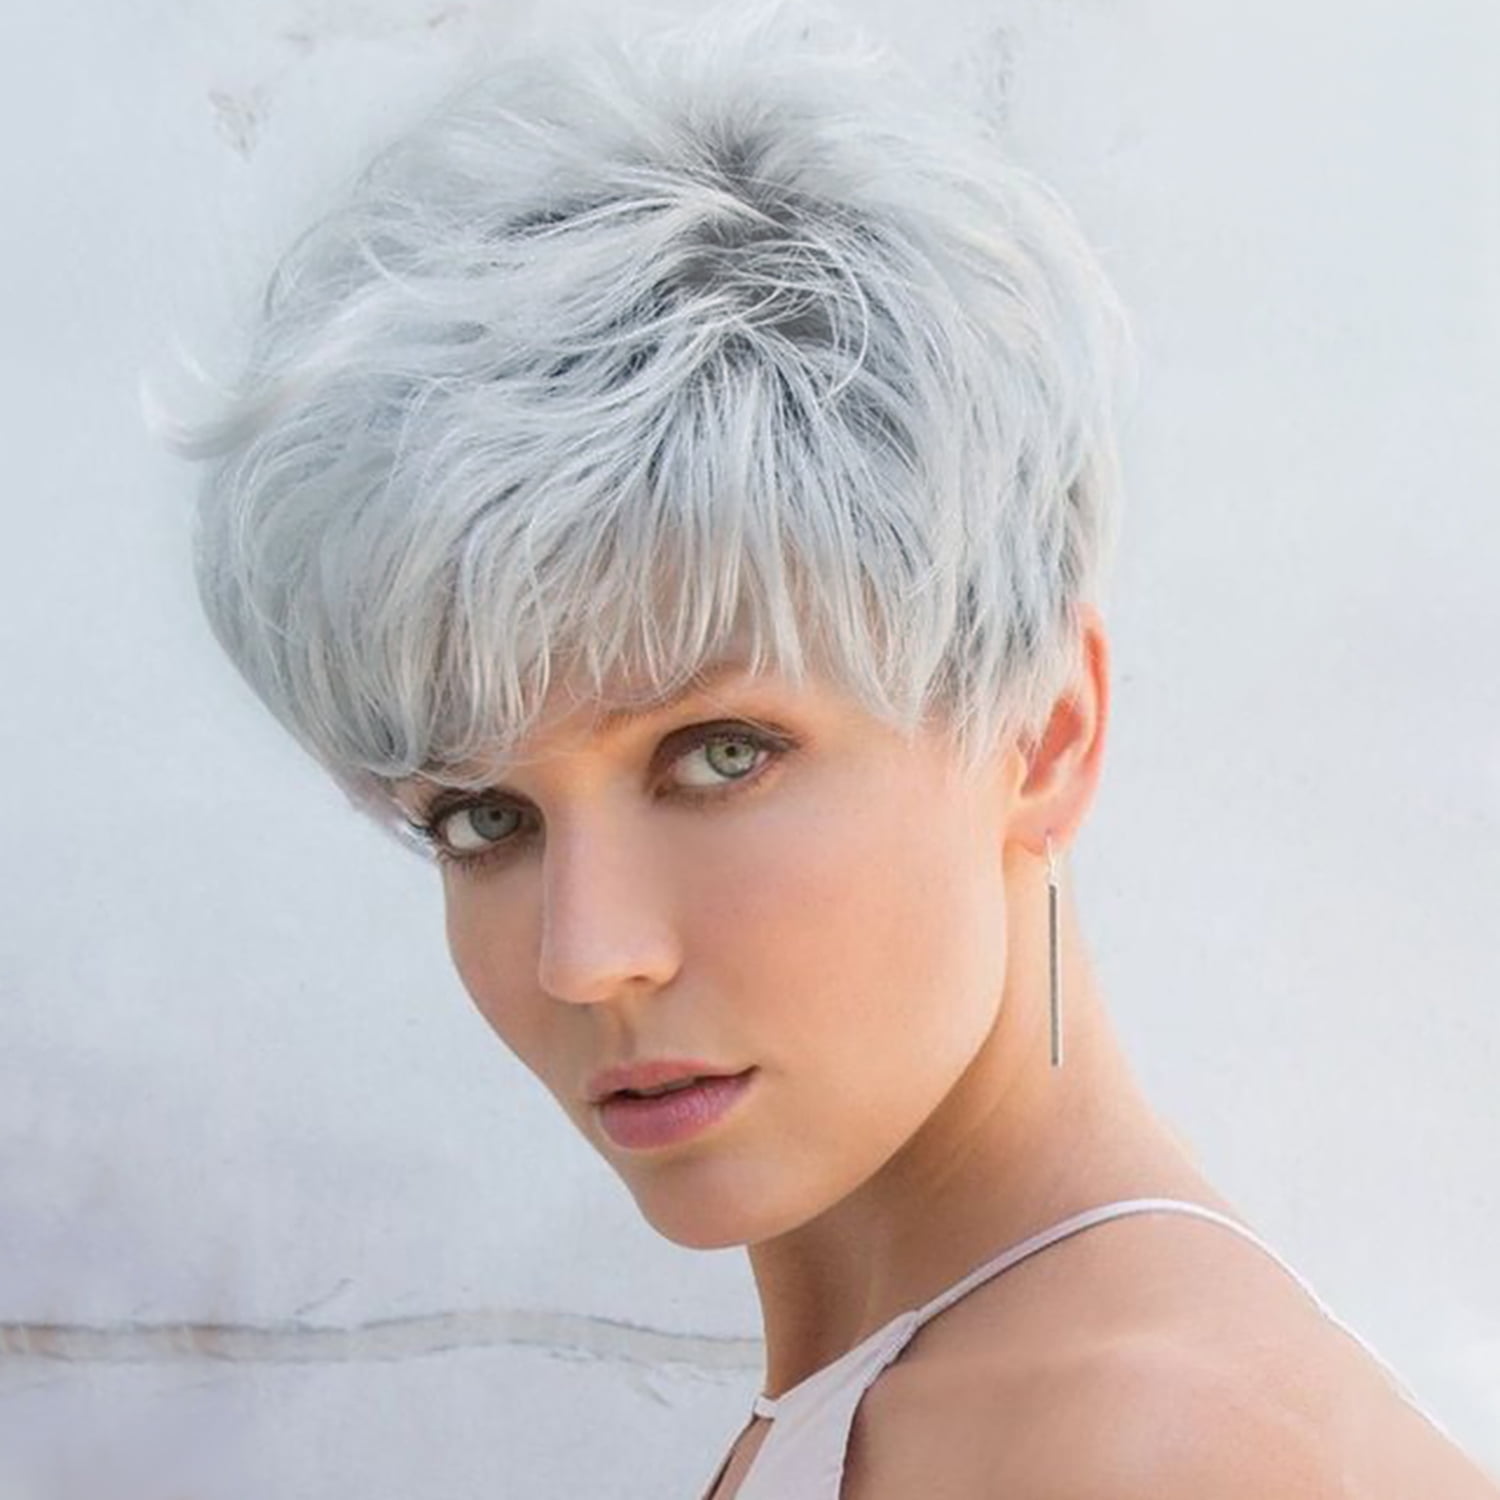 Lakihair Short Grey Wigs for Women Pixie Cut Wigs with Bangs Fluffy ...